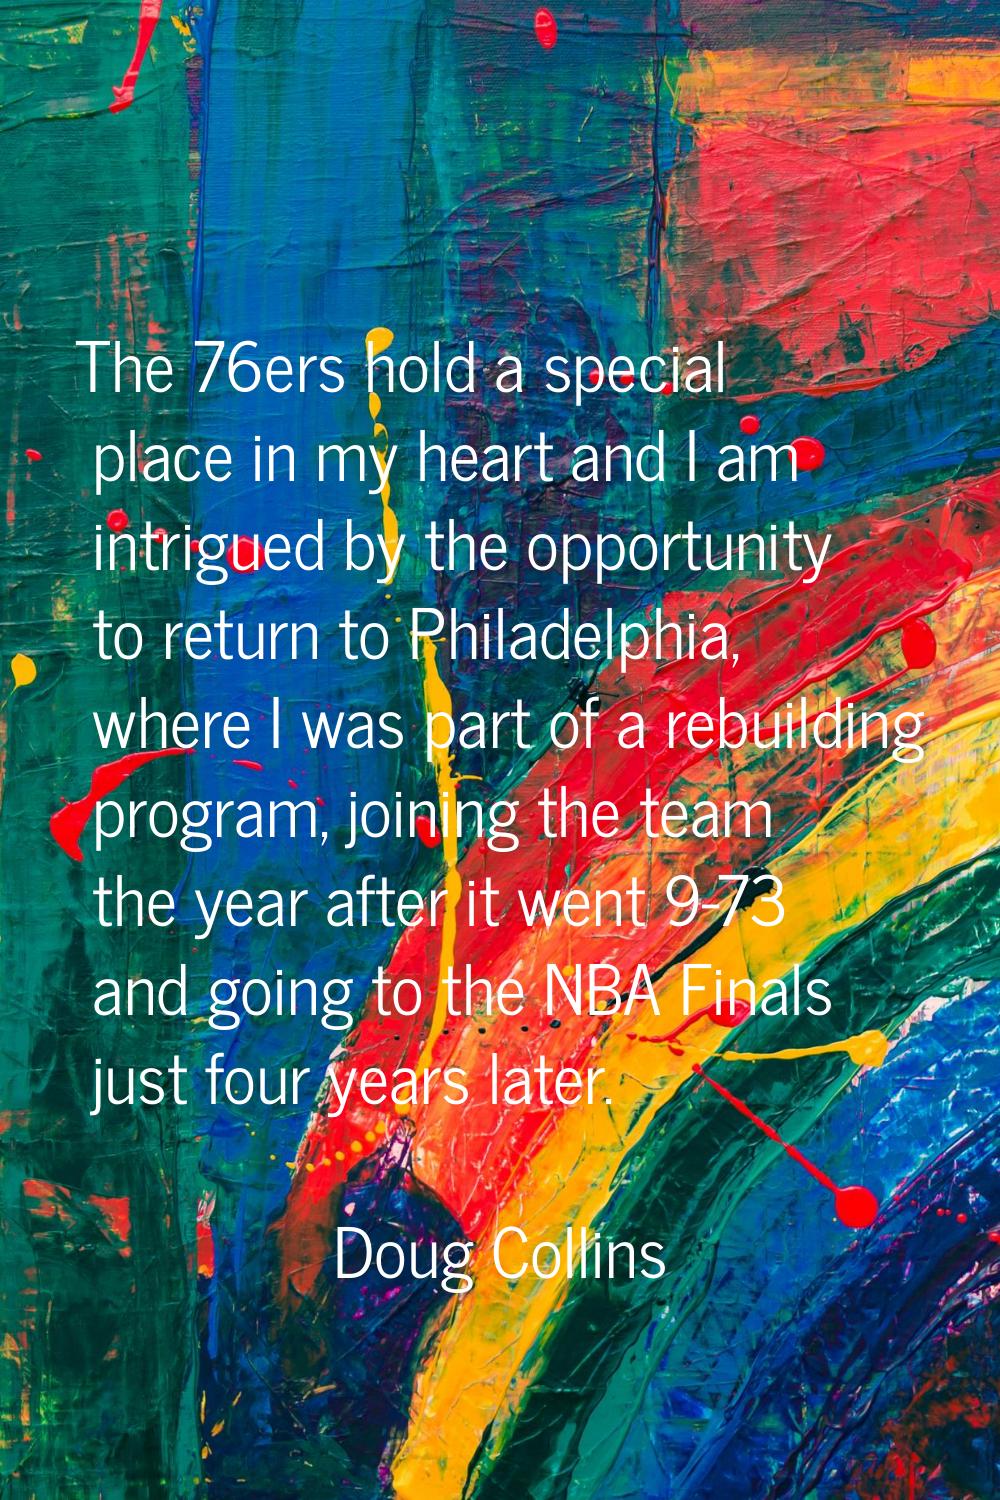 The 76ers hold a special place in my heart and I am intrigued by the opportunity to return to Phila